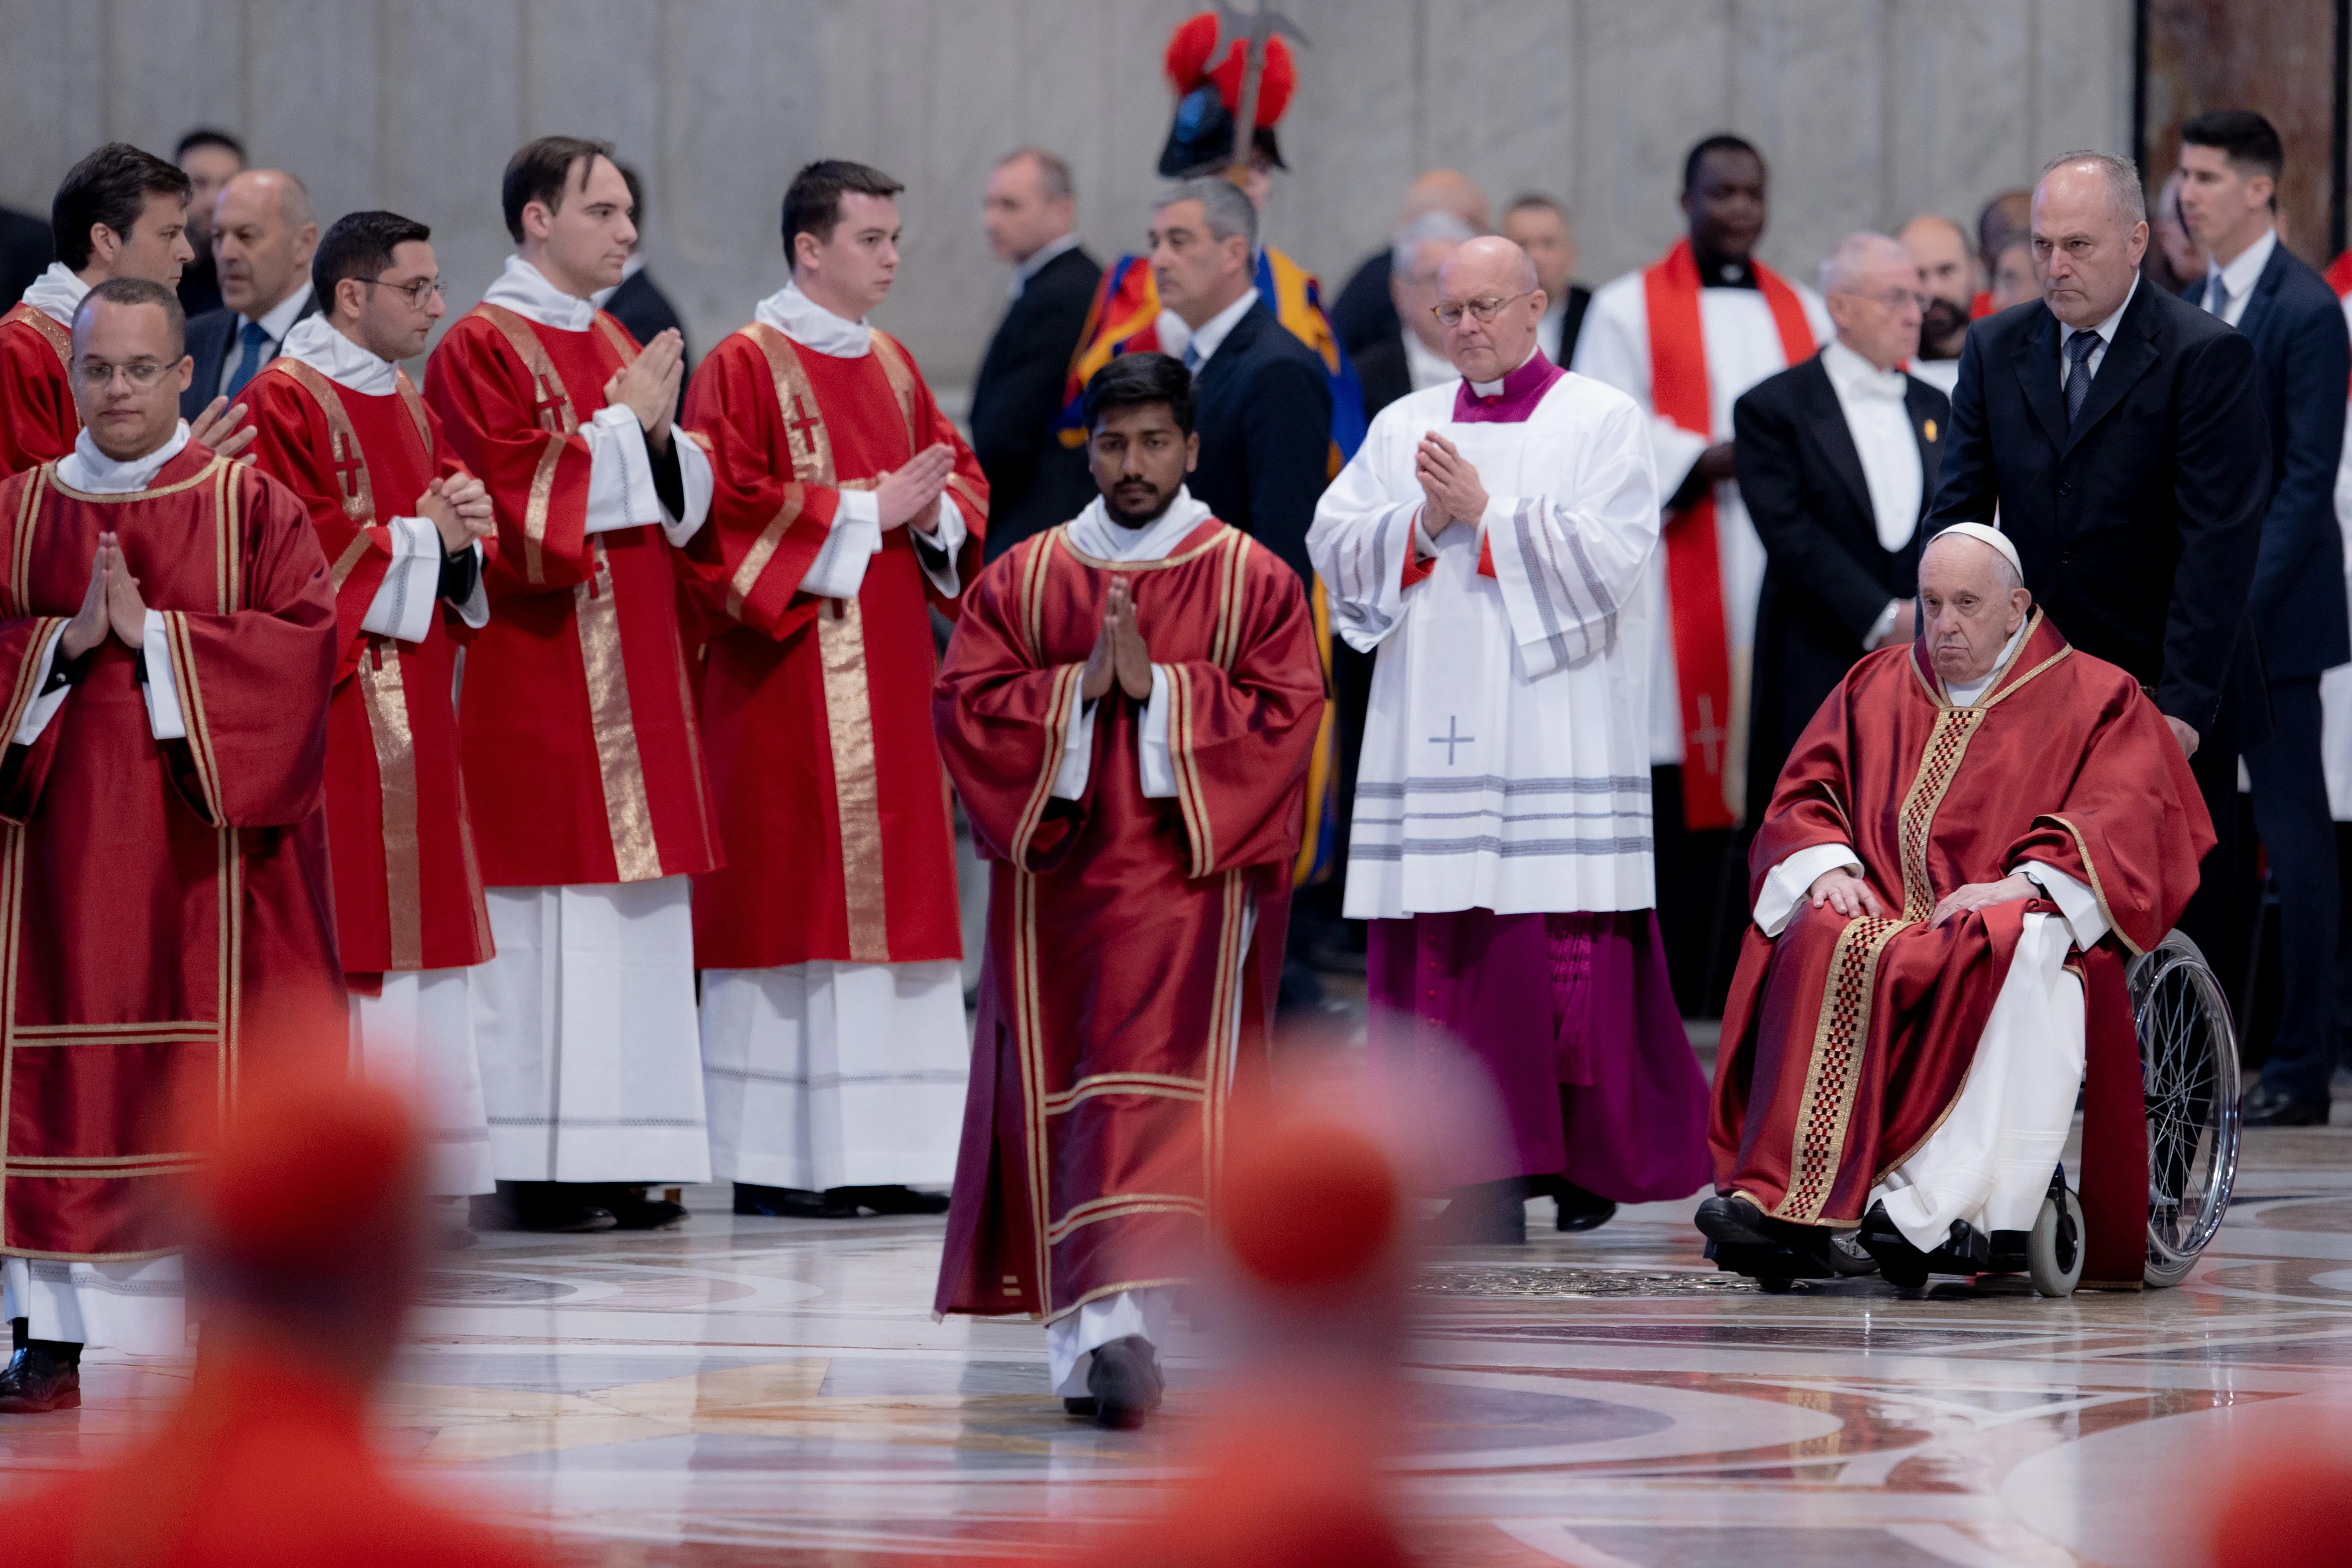 Pope Francis arrives at the Liturgy of the Lord’s Passion in St. Peter's Basilica on Good Friday on April 7, 2023. Daniel Ibanez/CNA